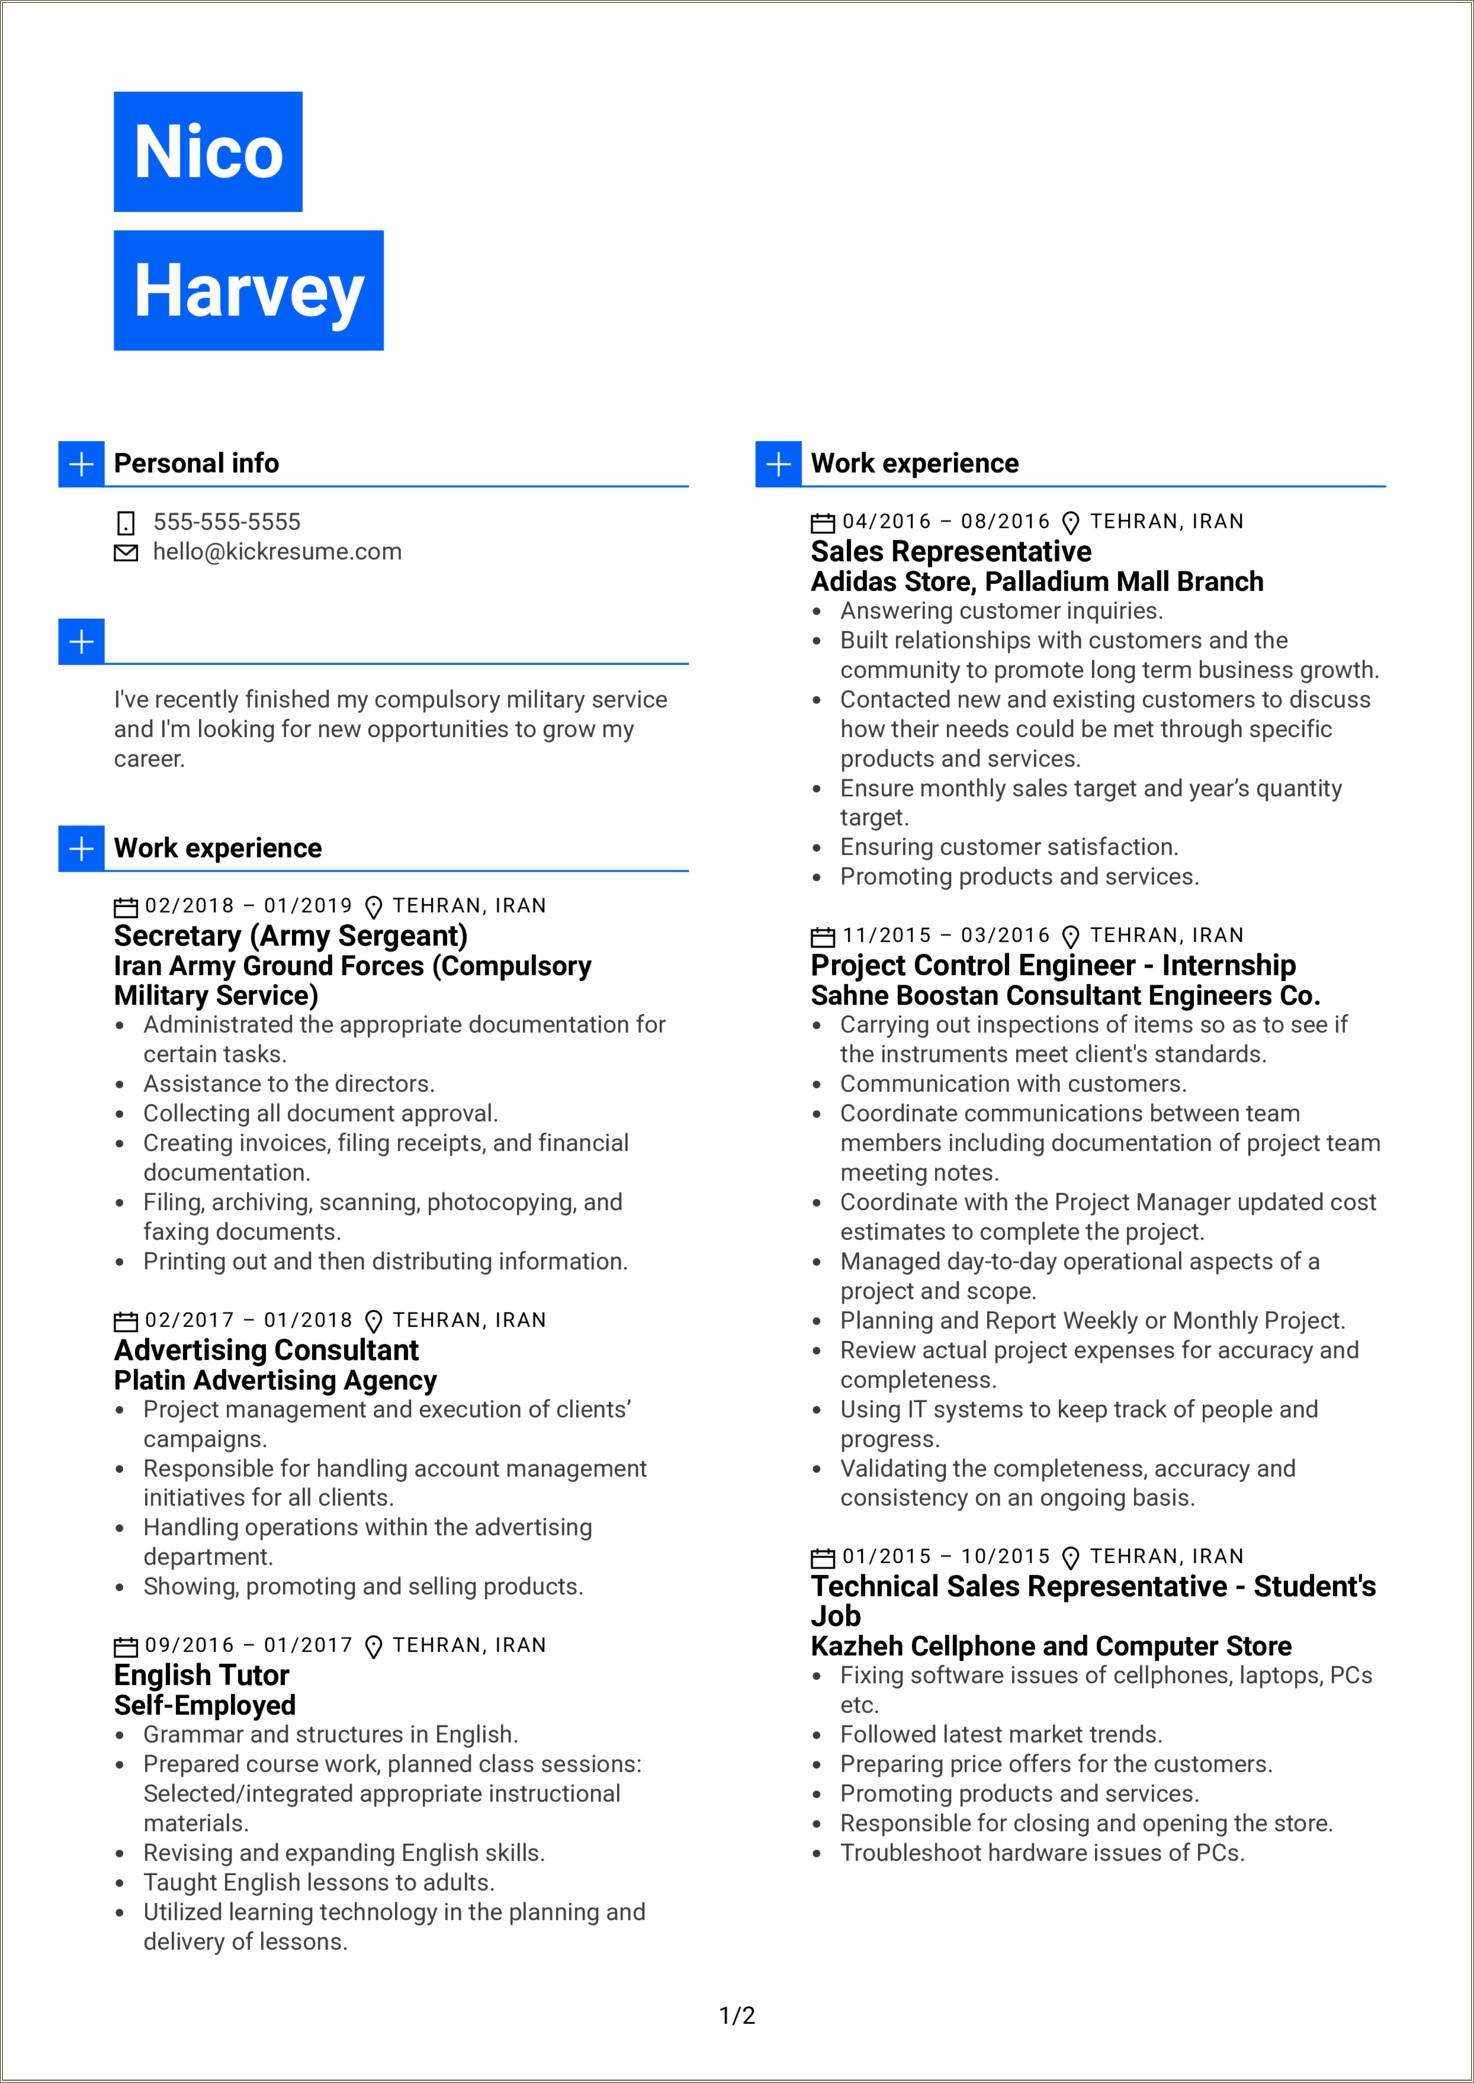 Examples Of Military Experience On Resumes